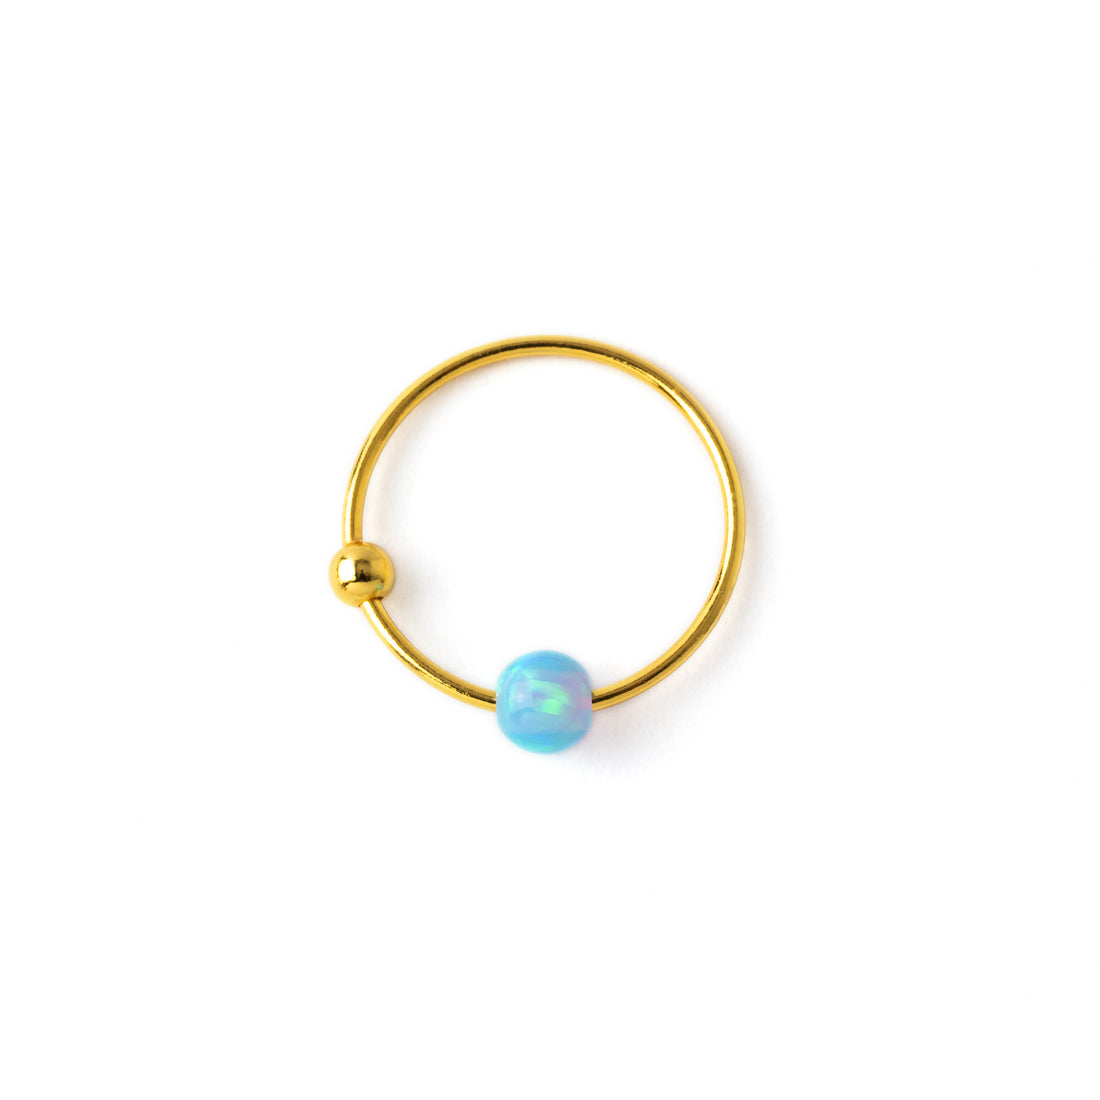 18k Gold nose ring with blue Opal bead frontal view